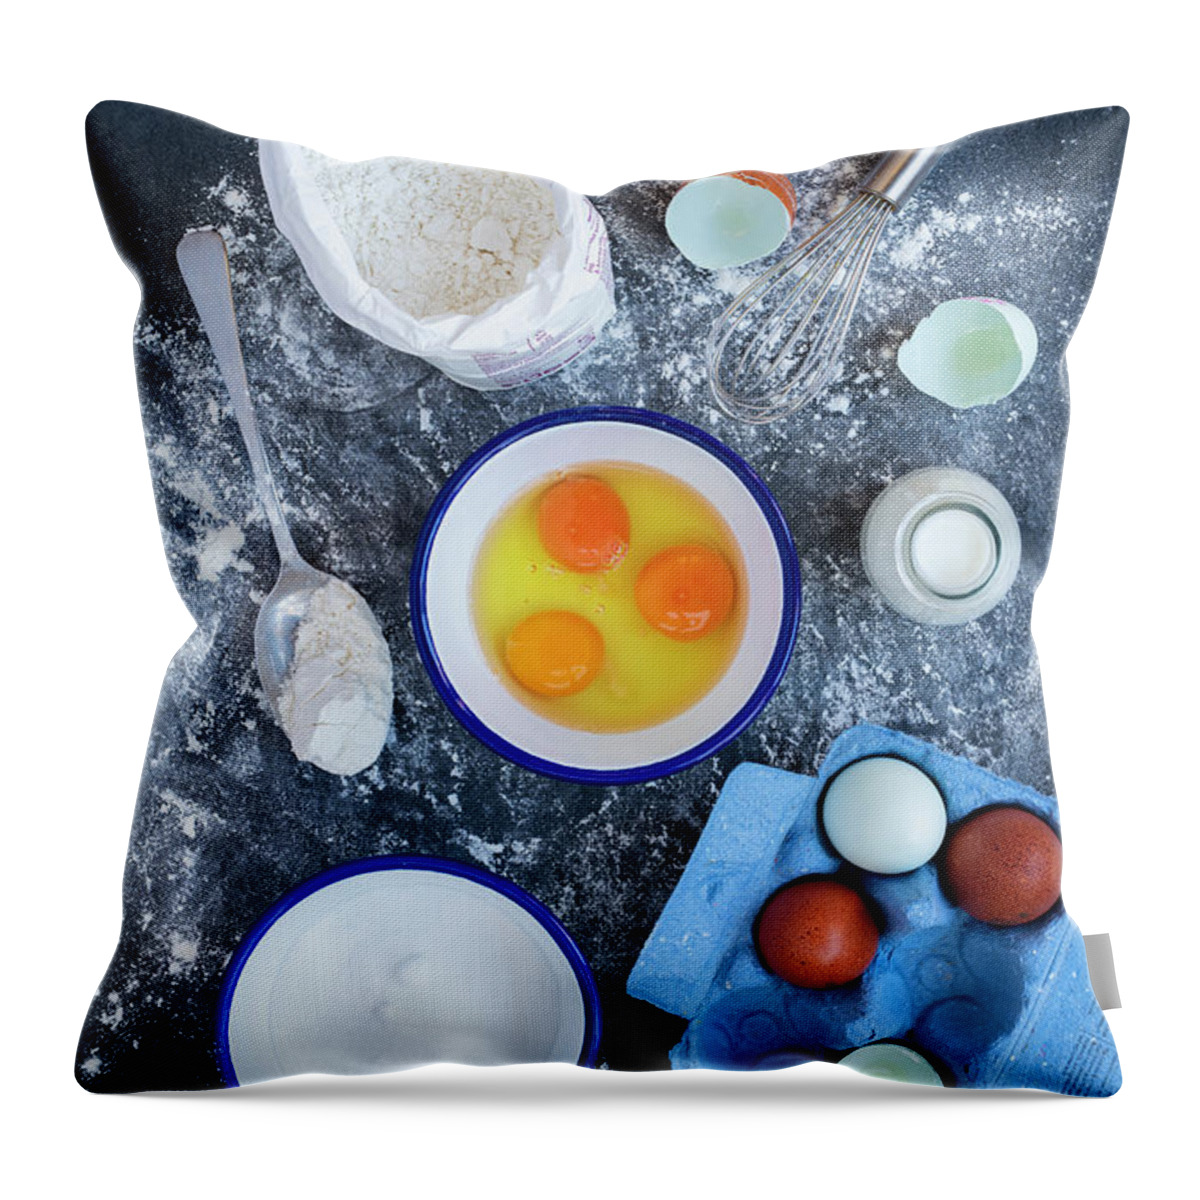 Baking Throw Pillow featuring the photograph Batter Ingredients by Tim Gainey